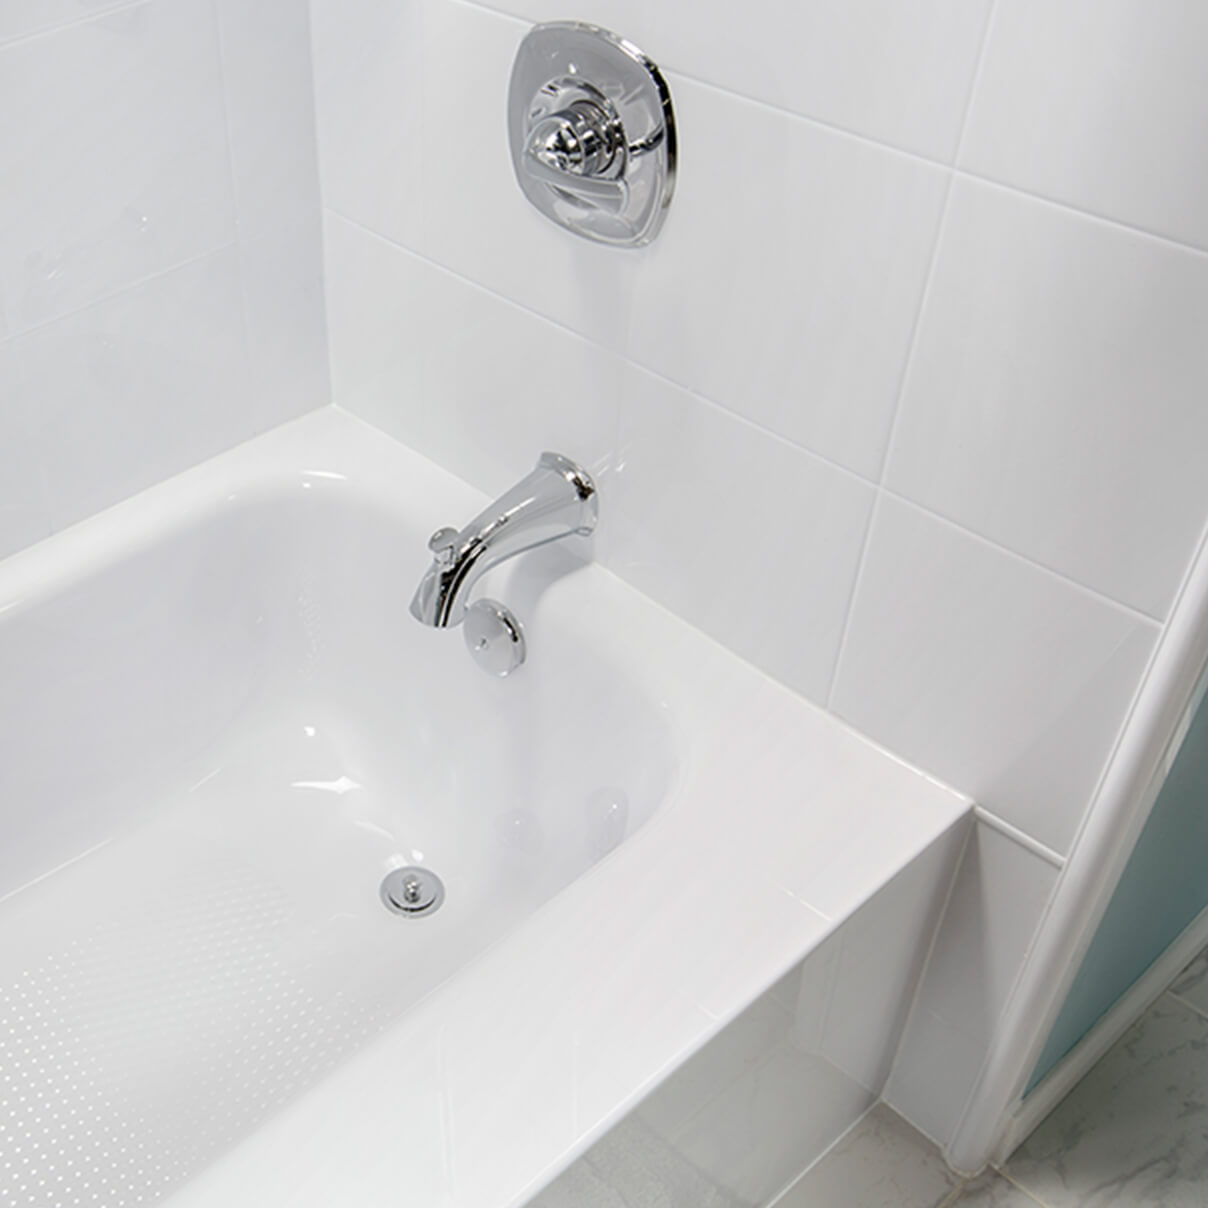 The Main Types of Bathtub Liners for Remodeling